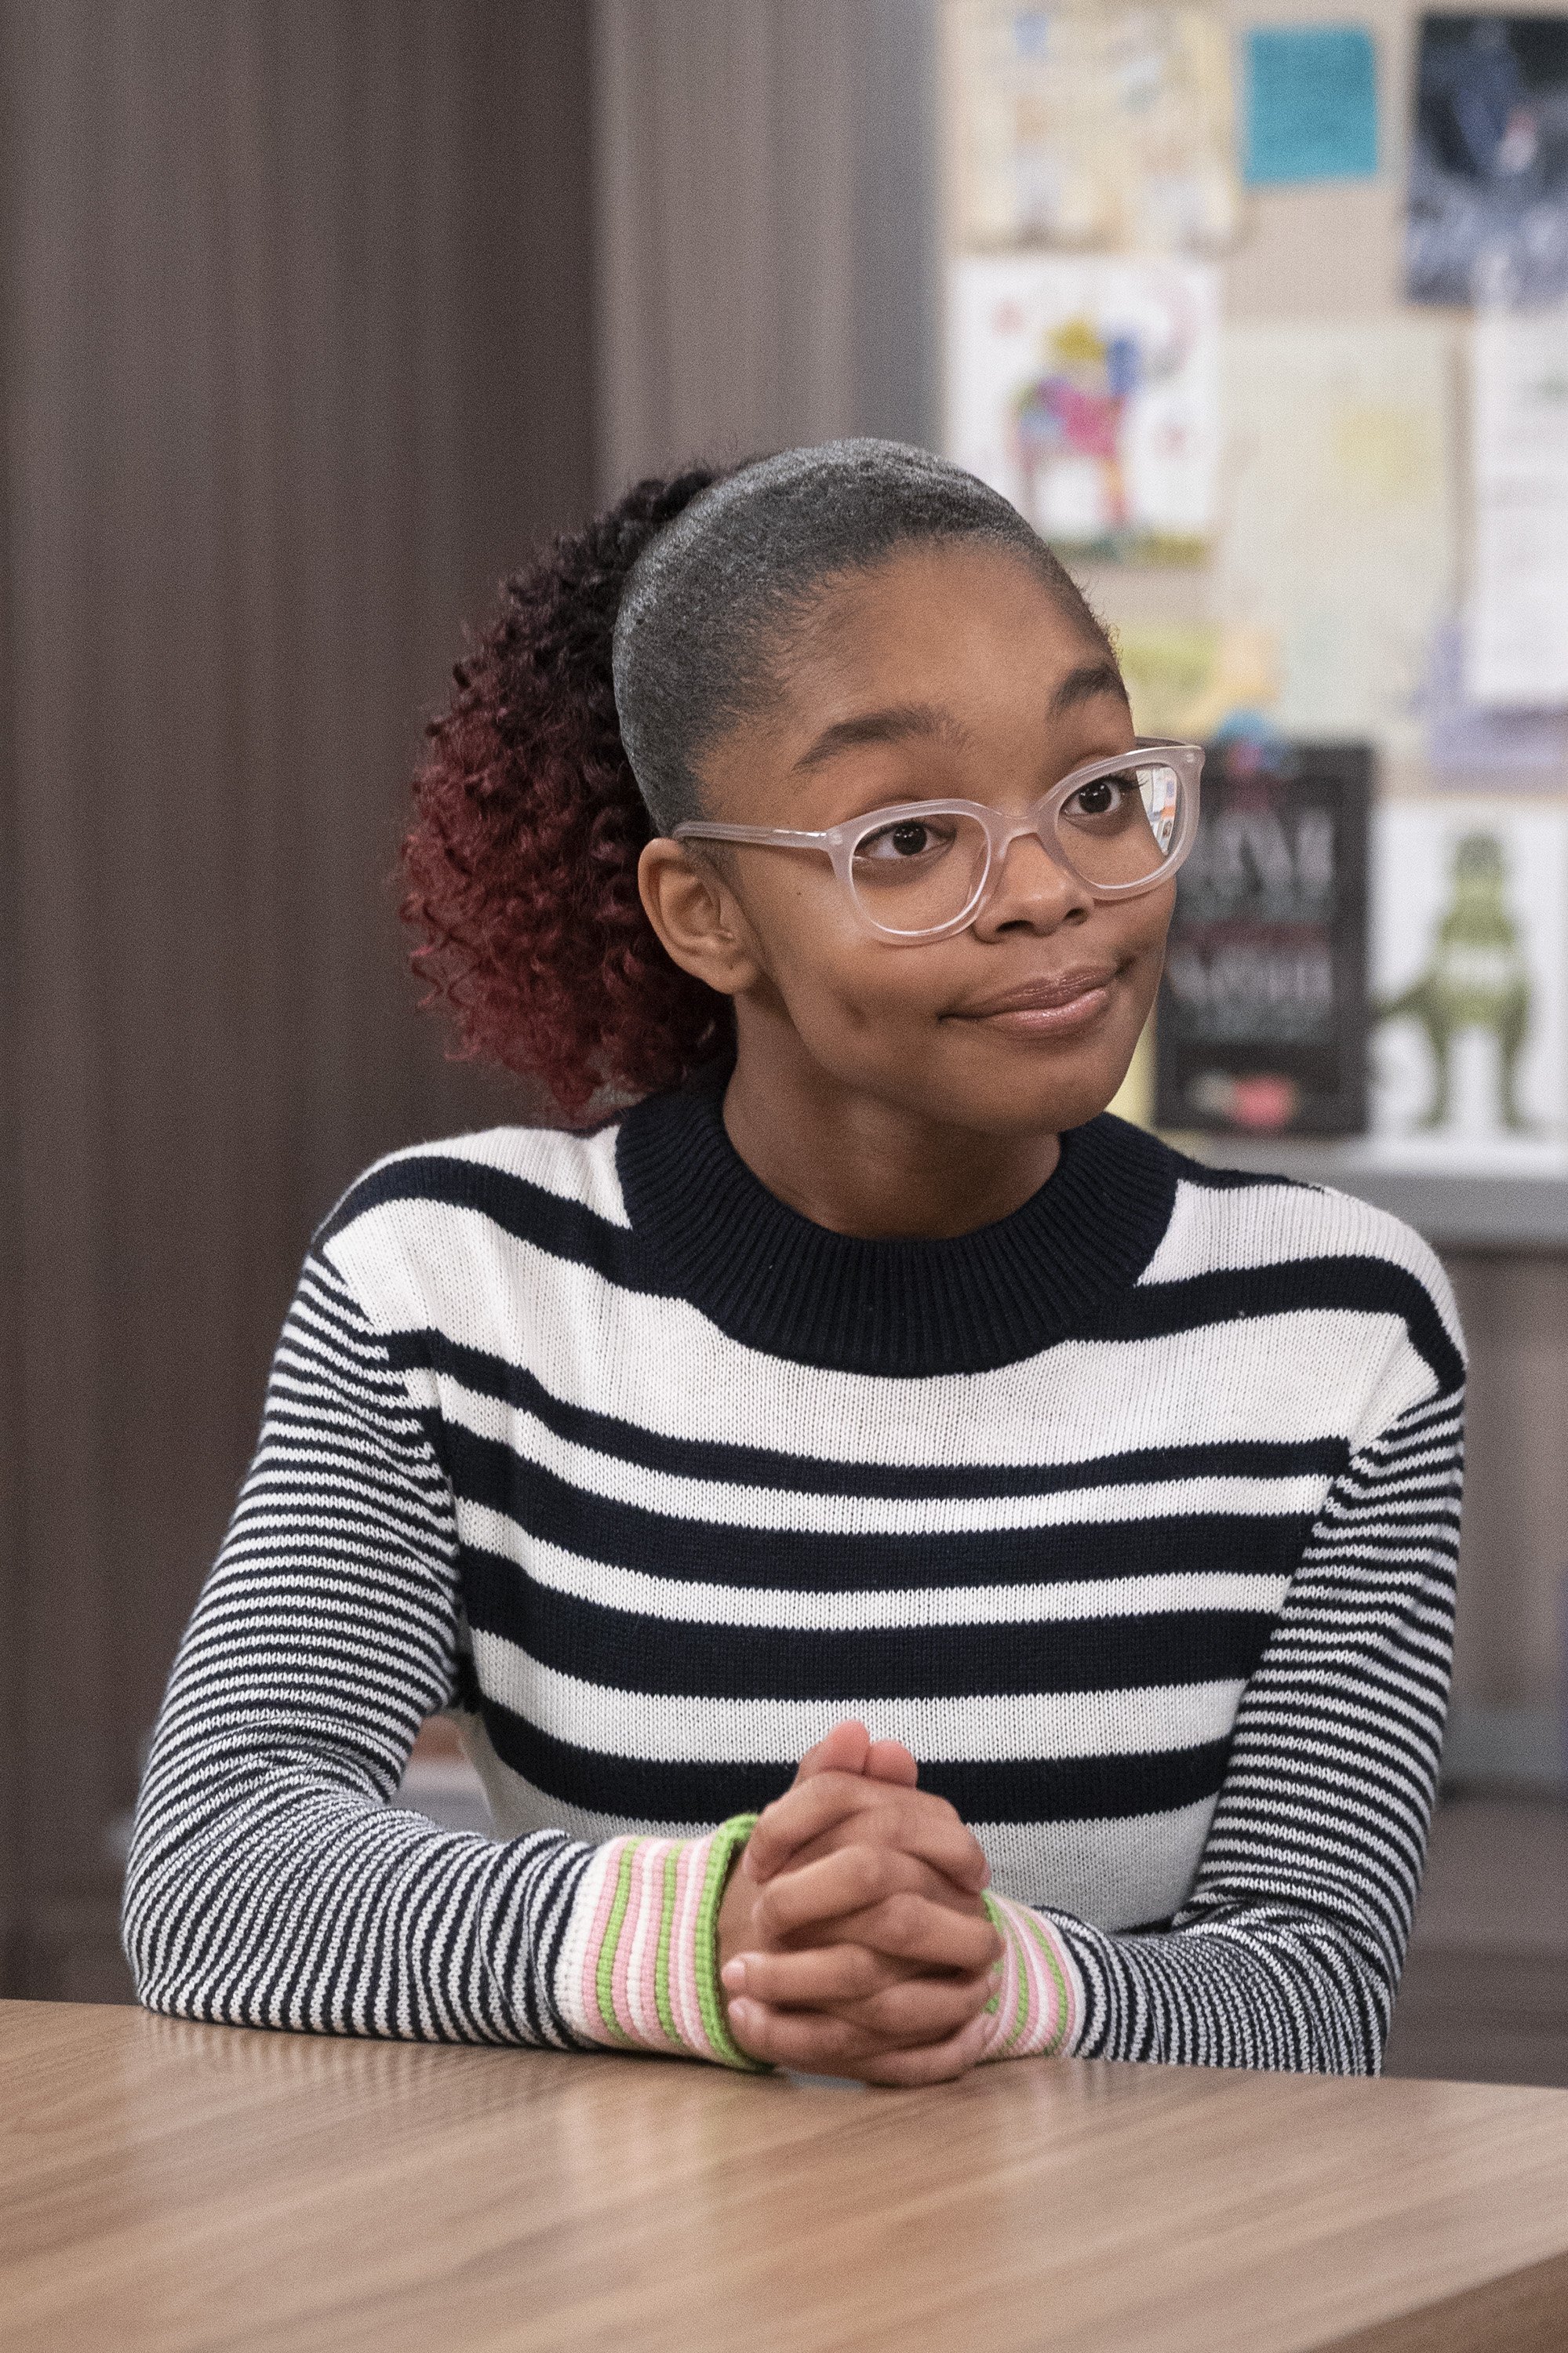 Pictured: An undated image of actress Marsai Martin on the set of ABC's "Black-ish" during Season 5 | Photo: Getty Images